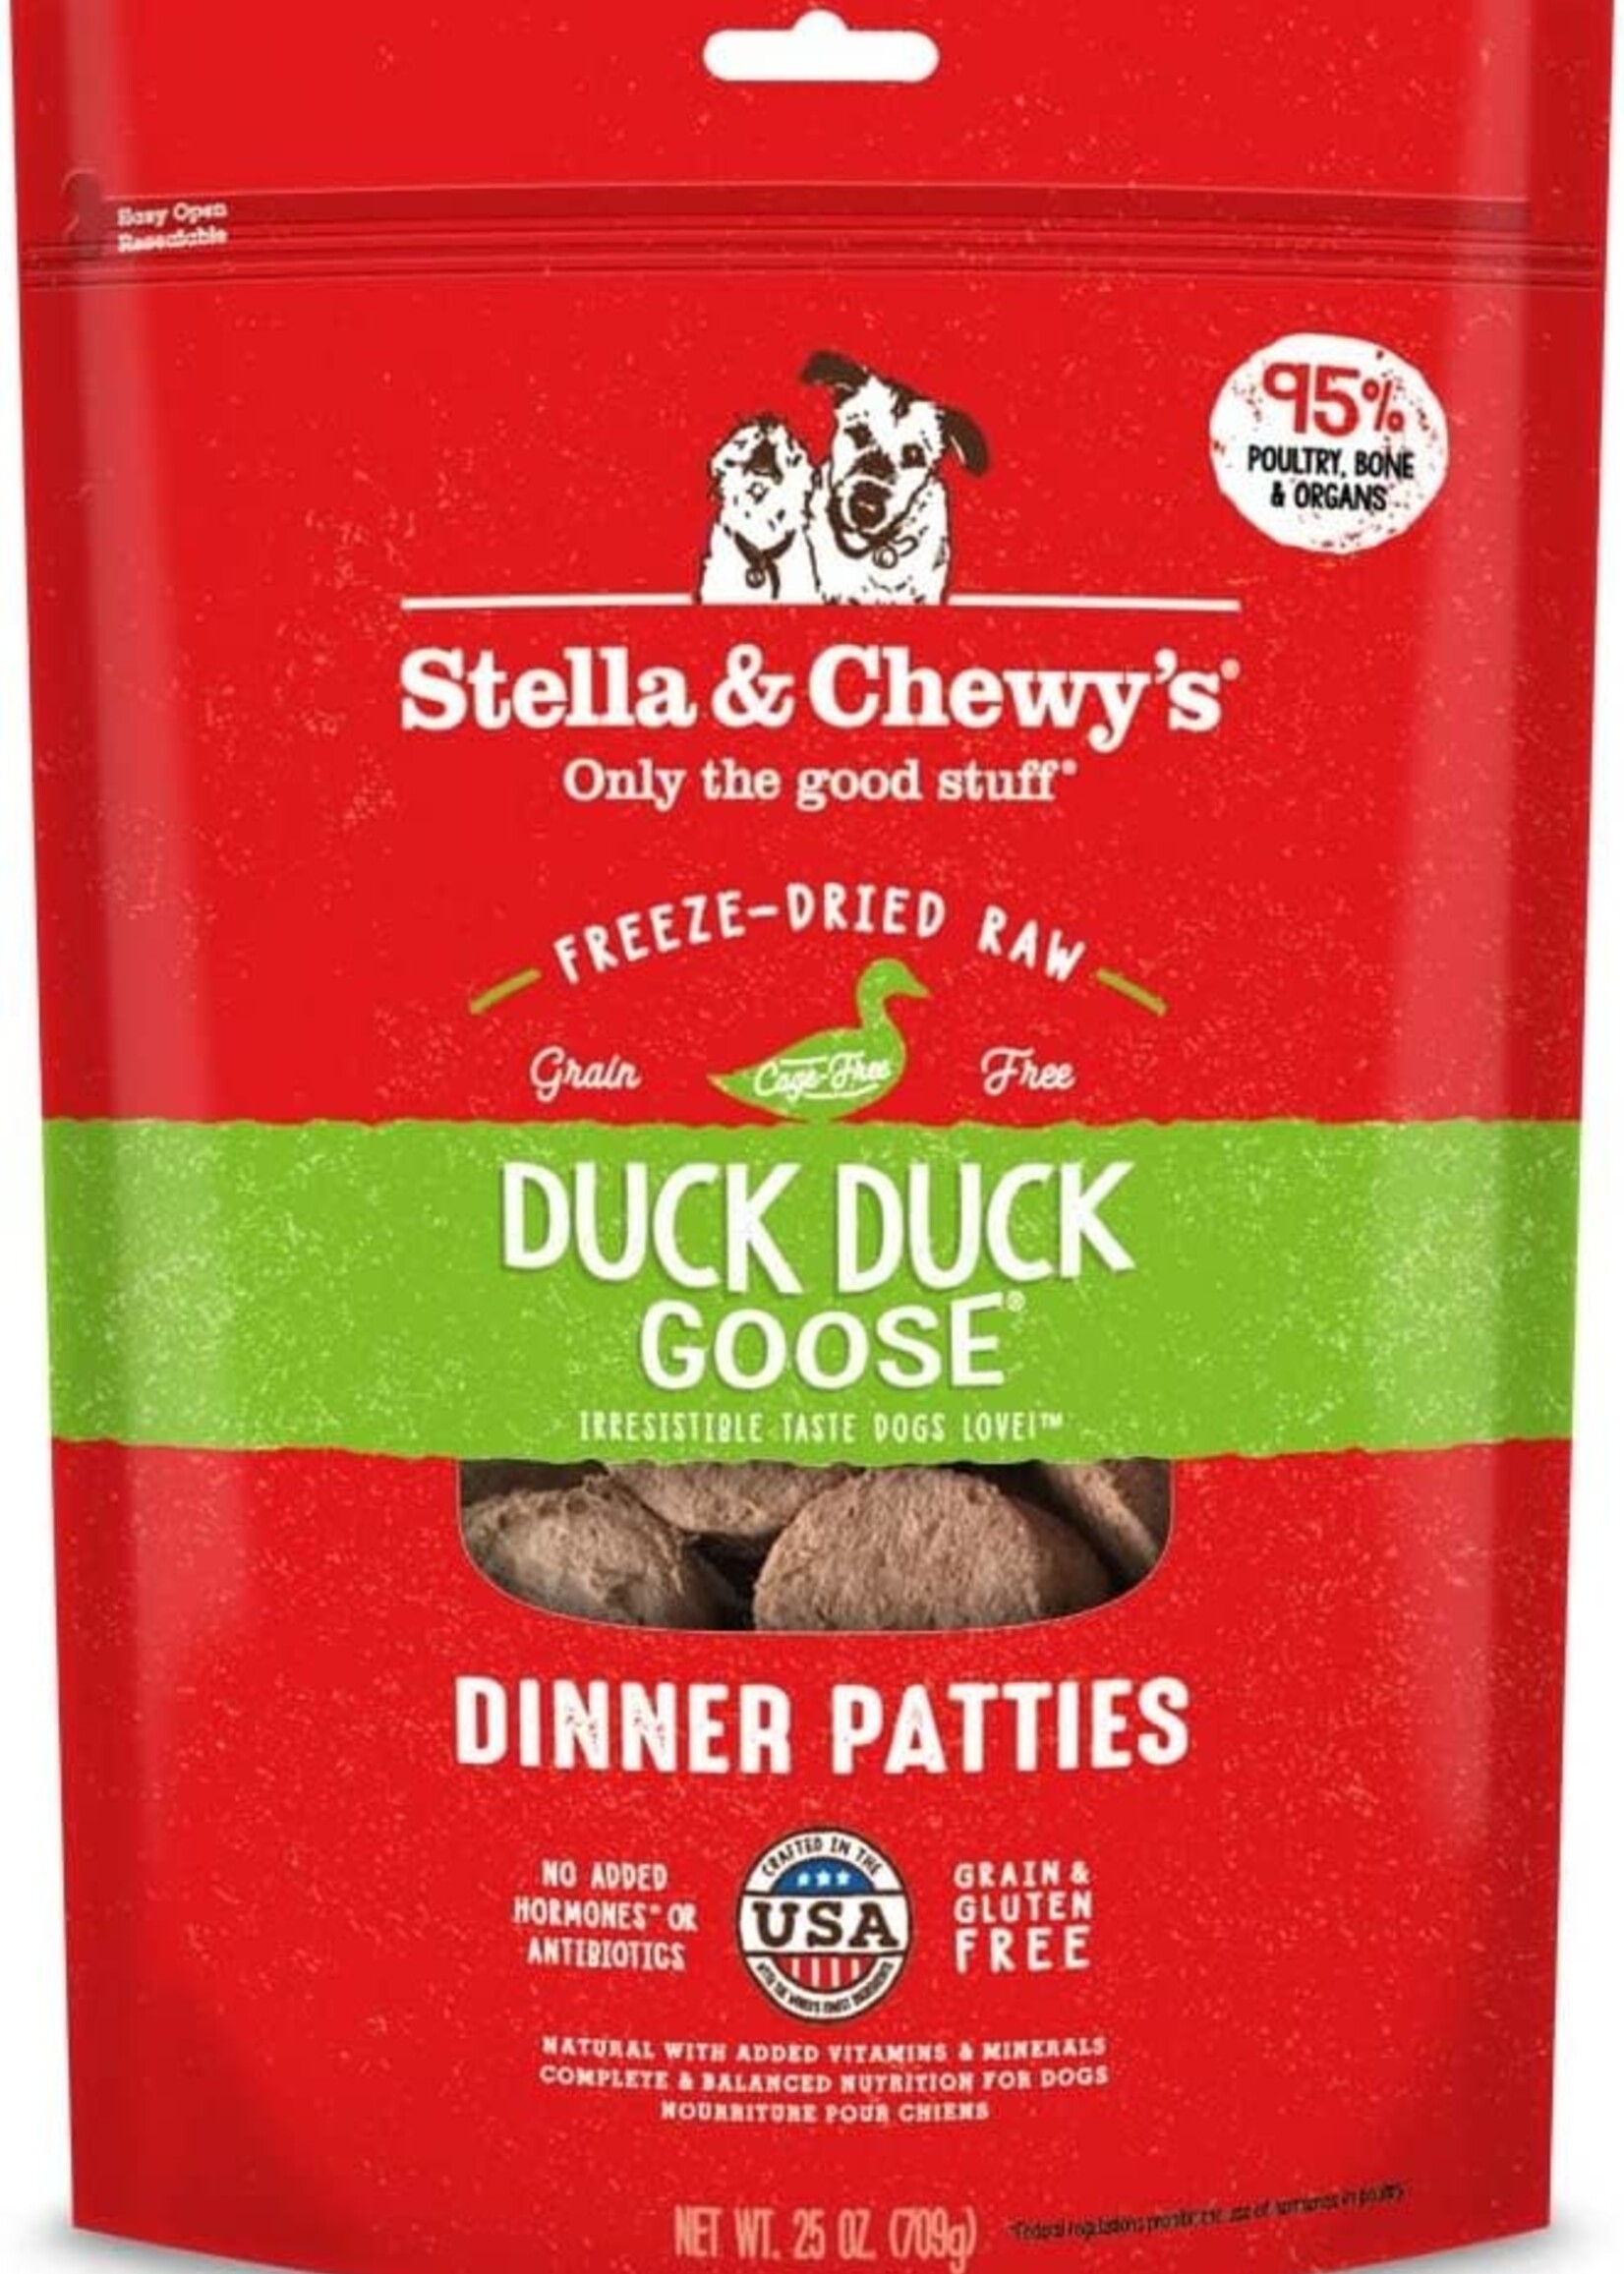 Stella & Chewy's Stella & Chewy's Duck Duck Goose Freeze-Dried Raw Dinner Patties Dog Food